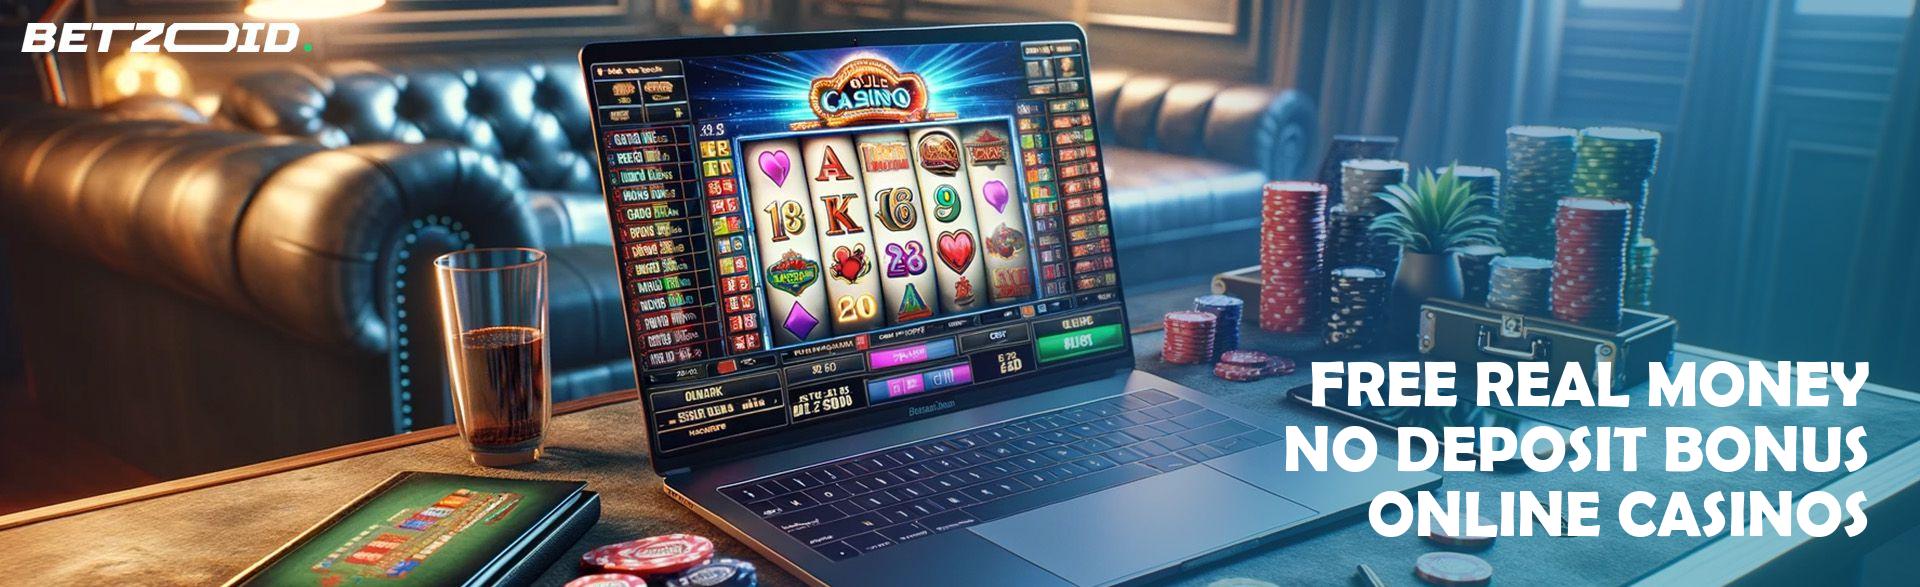 How To Find The Time To Choosing Wisely: Selecting a Trustworthy Online Casino in Bangladesh On Facebook